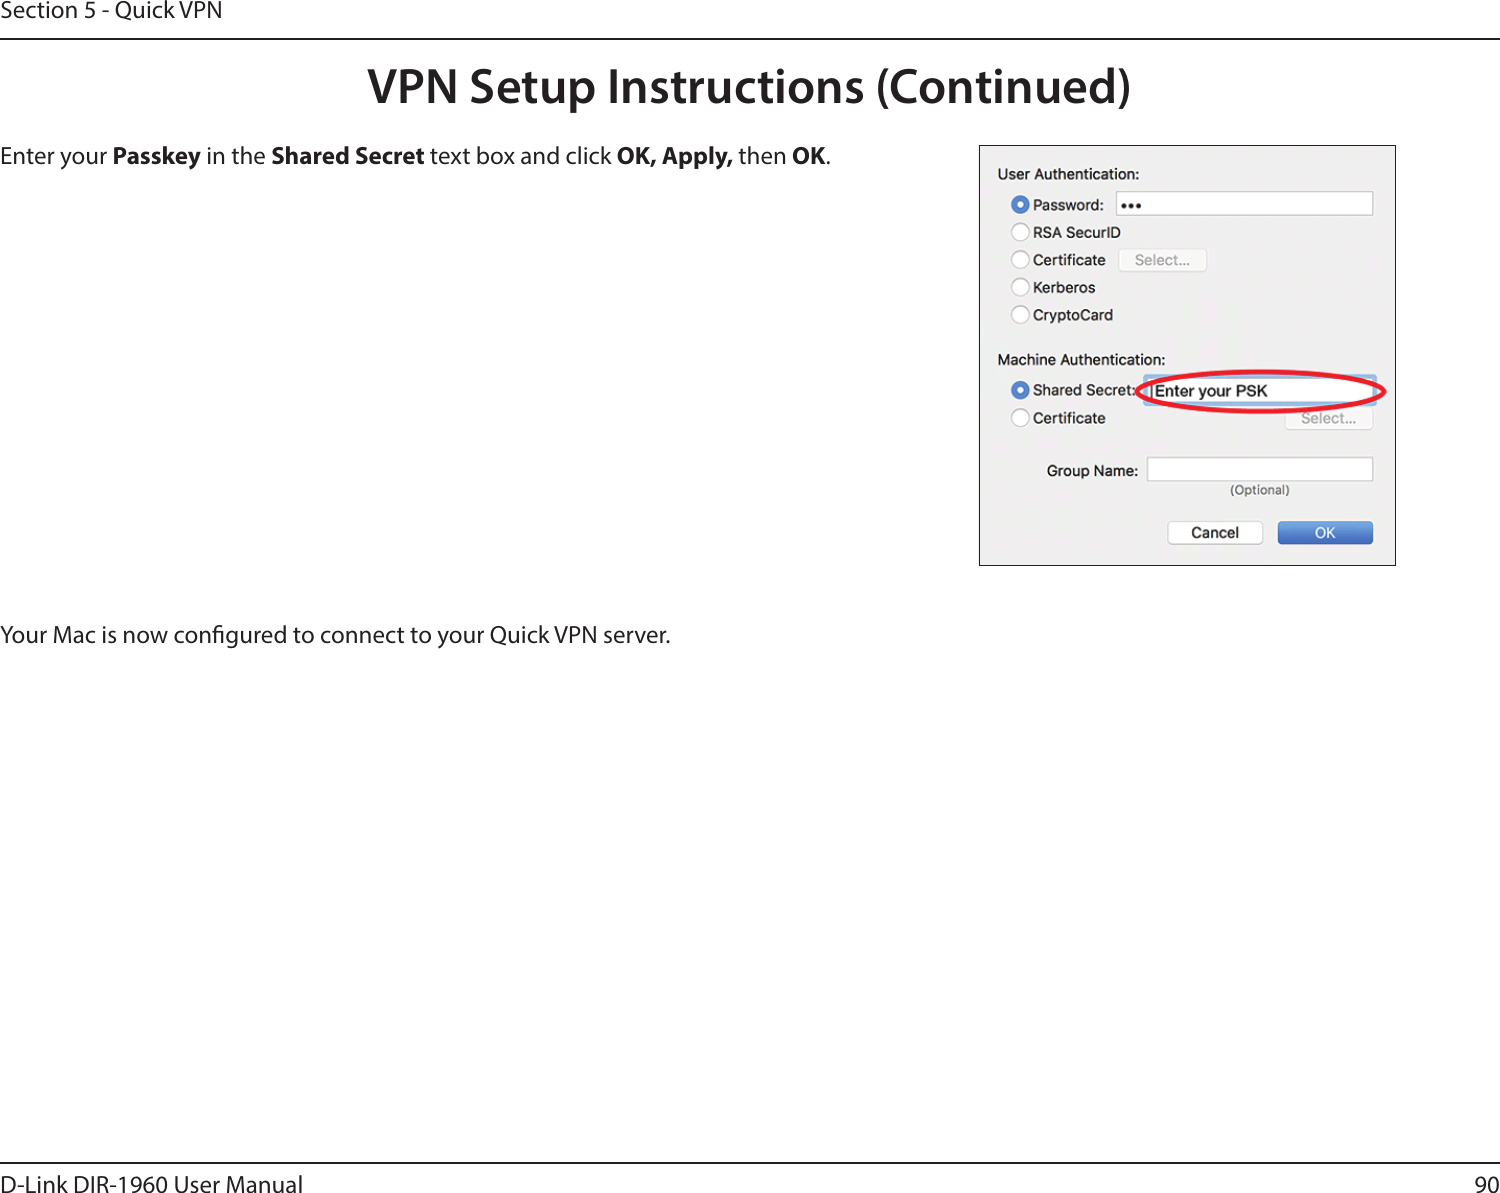 90D-Link DIR-1960 User ManualSection 5 - Quick VPNEnter your Passkey in the Shared Secret text box and click OK, Apply, then OK.Your Mac is now congured to connect to your Quick VPN server.VPN Setup Instructions (Continued)